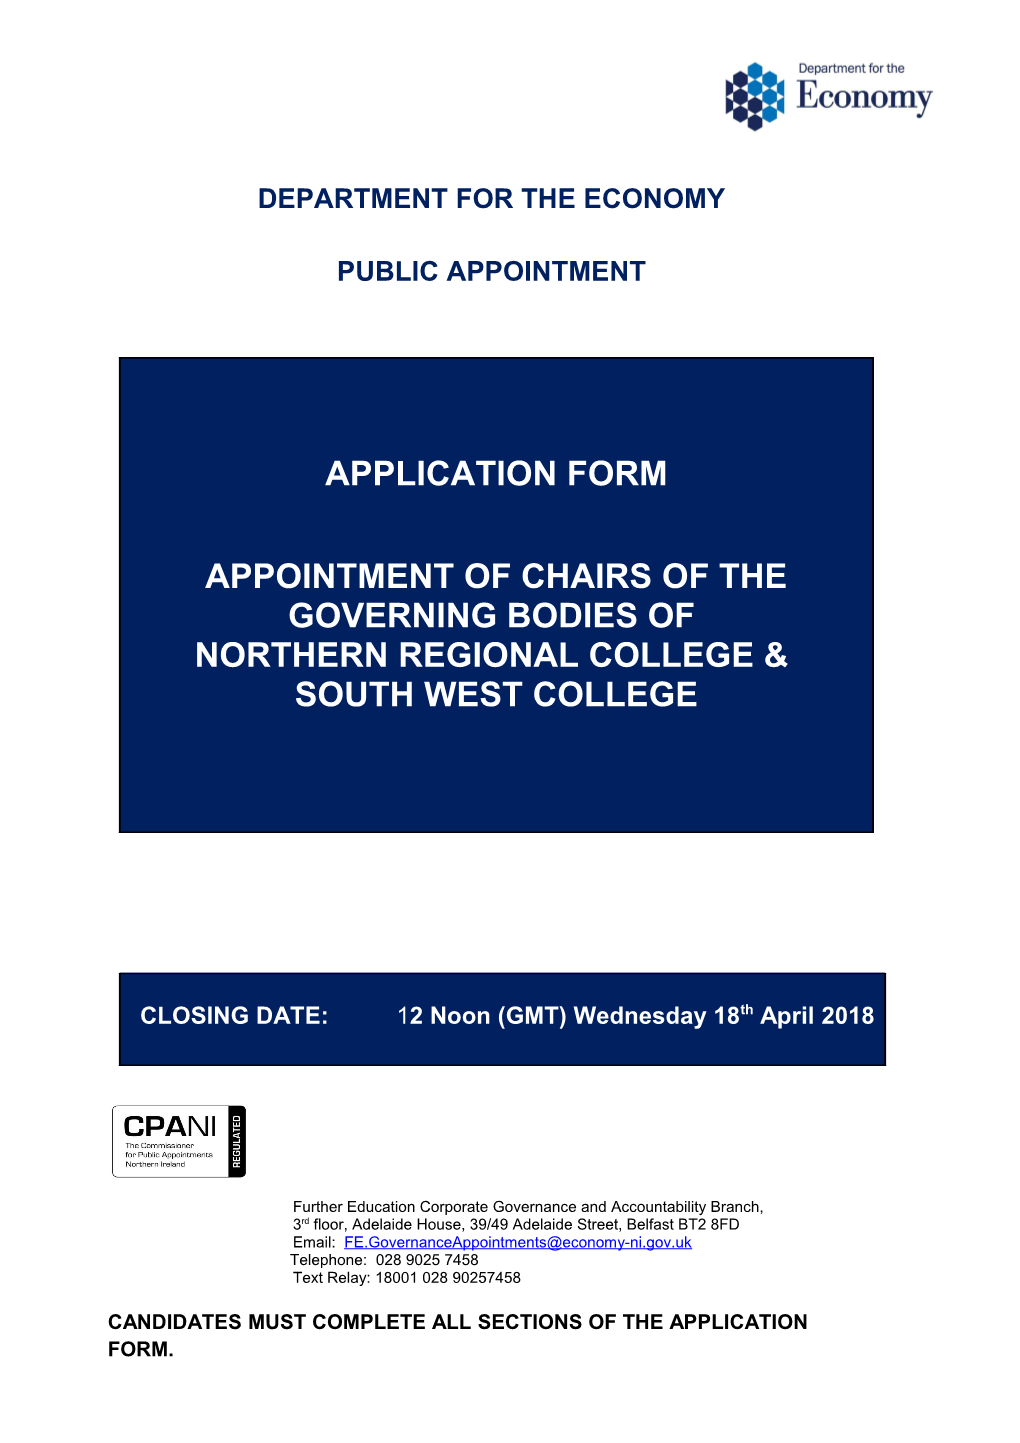 Application Form - Appointment of Chairs of Governing Bodies of Northern Regional College